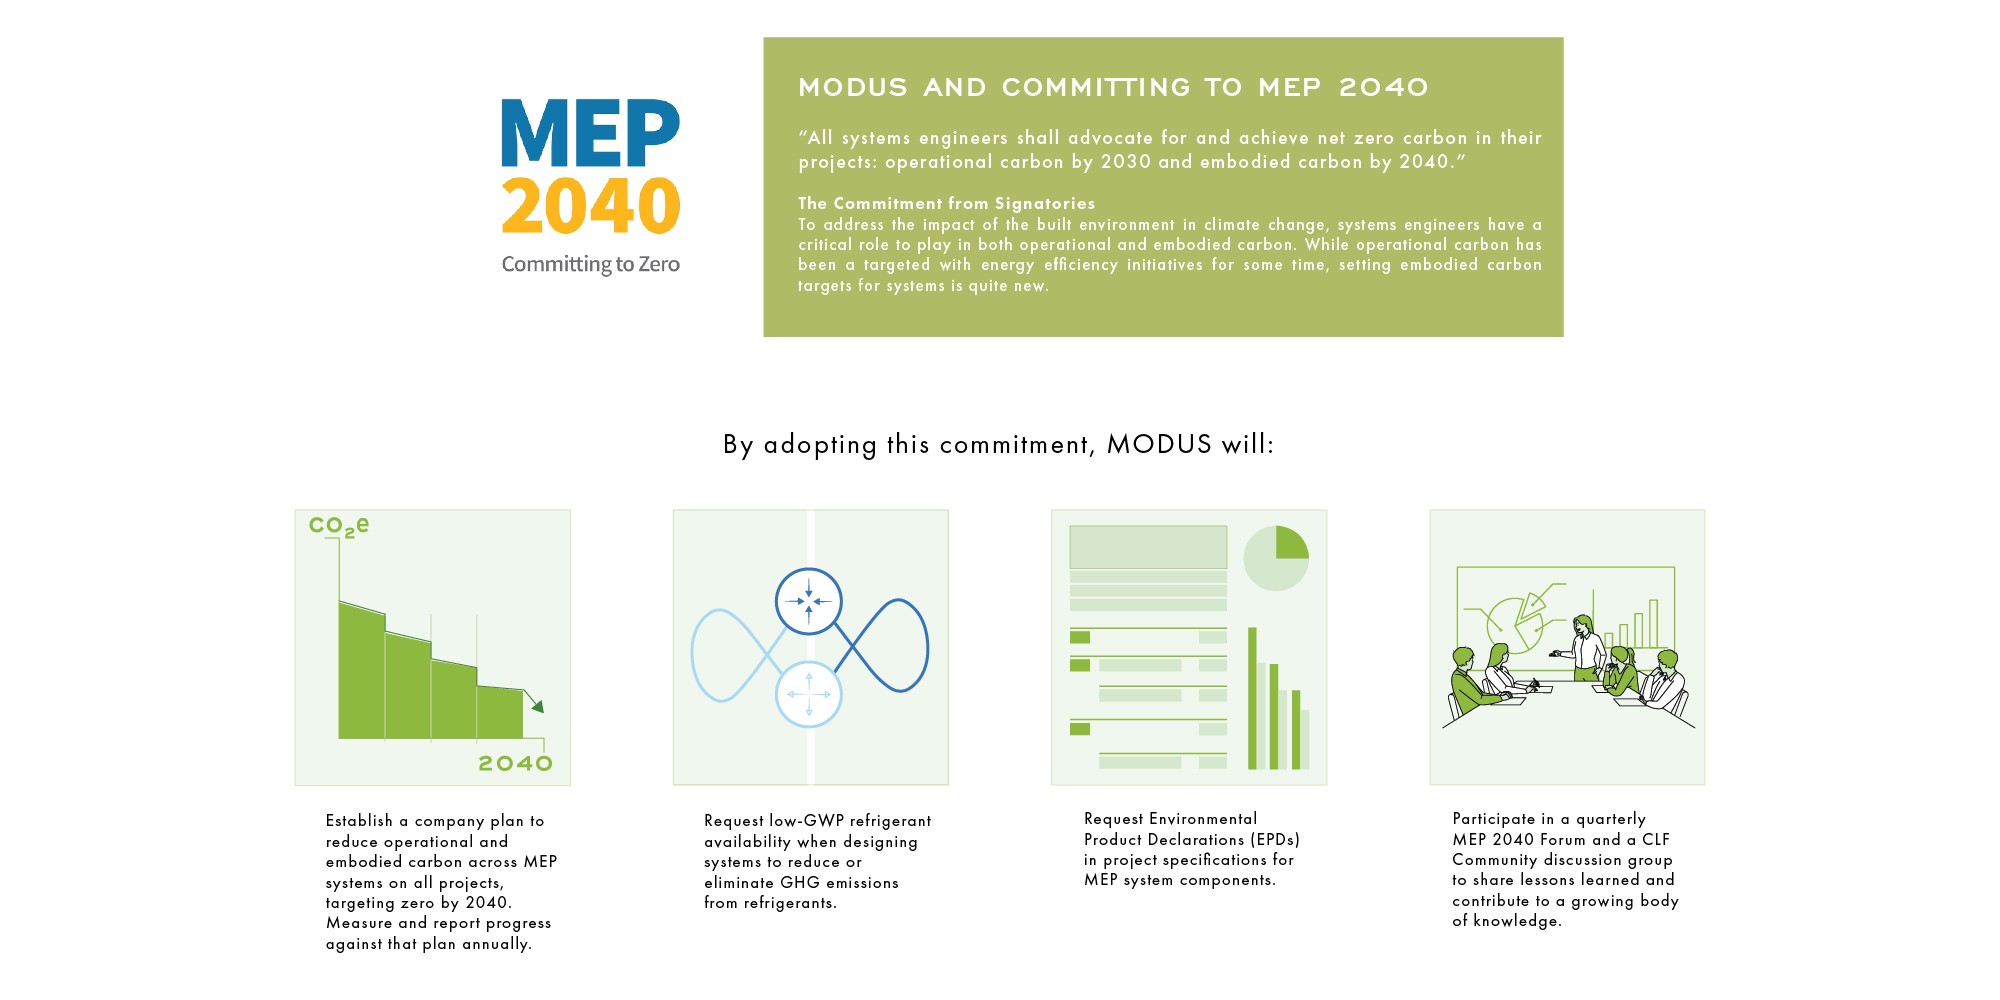 MODUS and Committing to MEP 2040 “All systems engineers shall advocate for and achieve net zero carbon in their projects: operational carbon by 2030 and embodied carbon by 2040.” The Commitment from Signatories To address the impact of the built environment in climate change, systems engineers have a critical role to play in both operational and embodied carbon. While operational carbon has been a targeted with energy efficiency initiatives for some time, setting embodied carbon targets for systems is quite new.